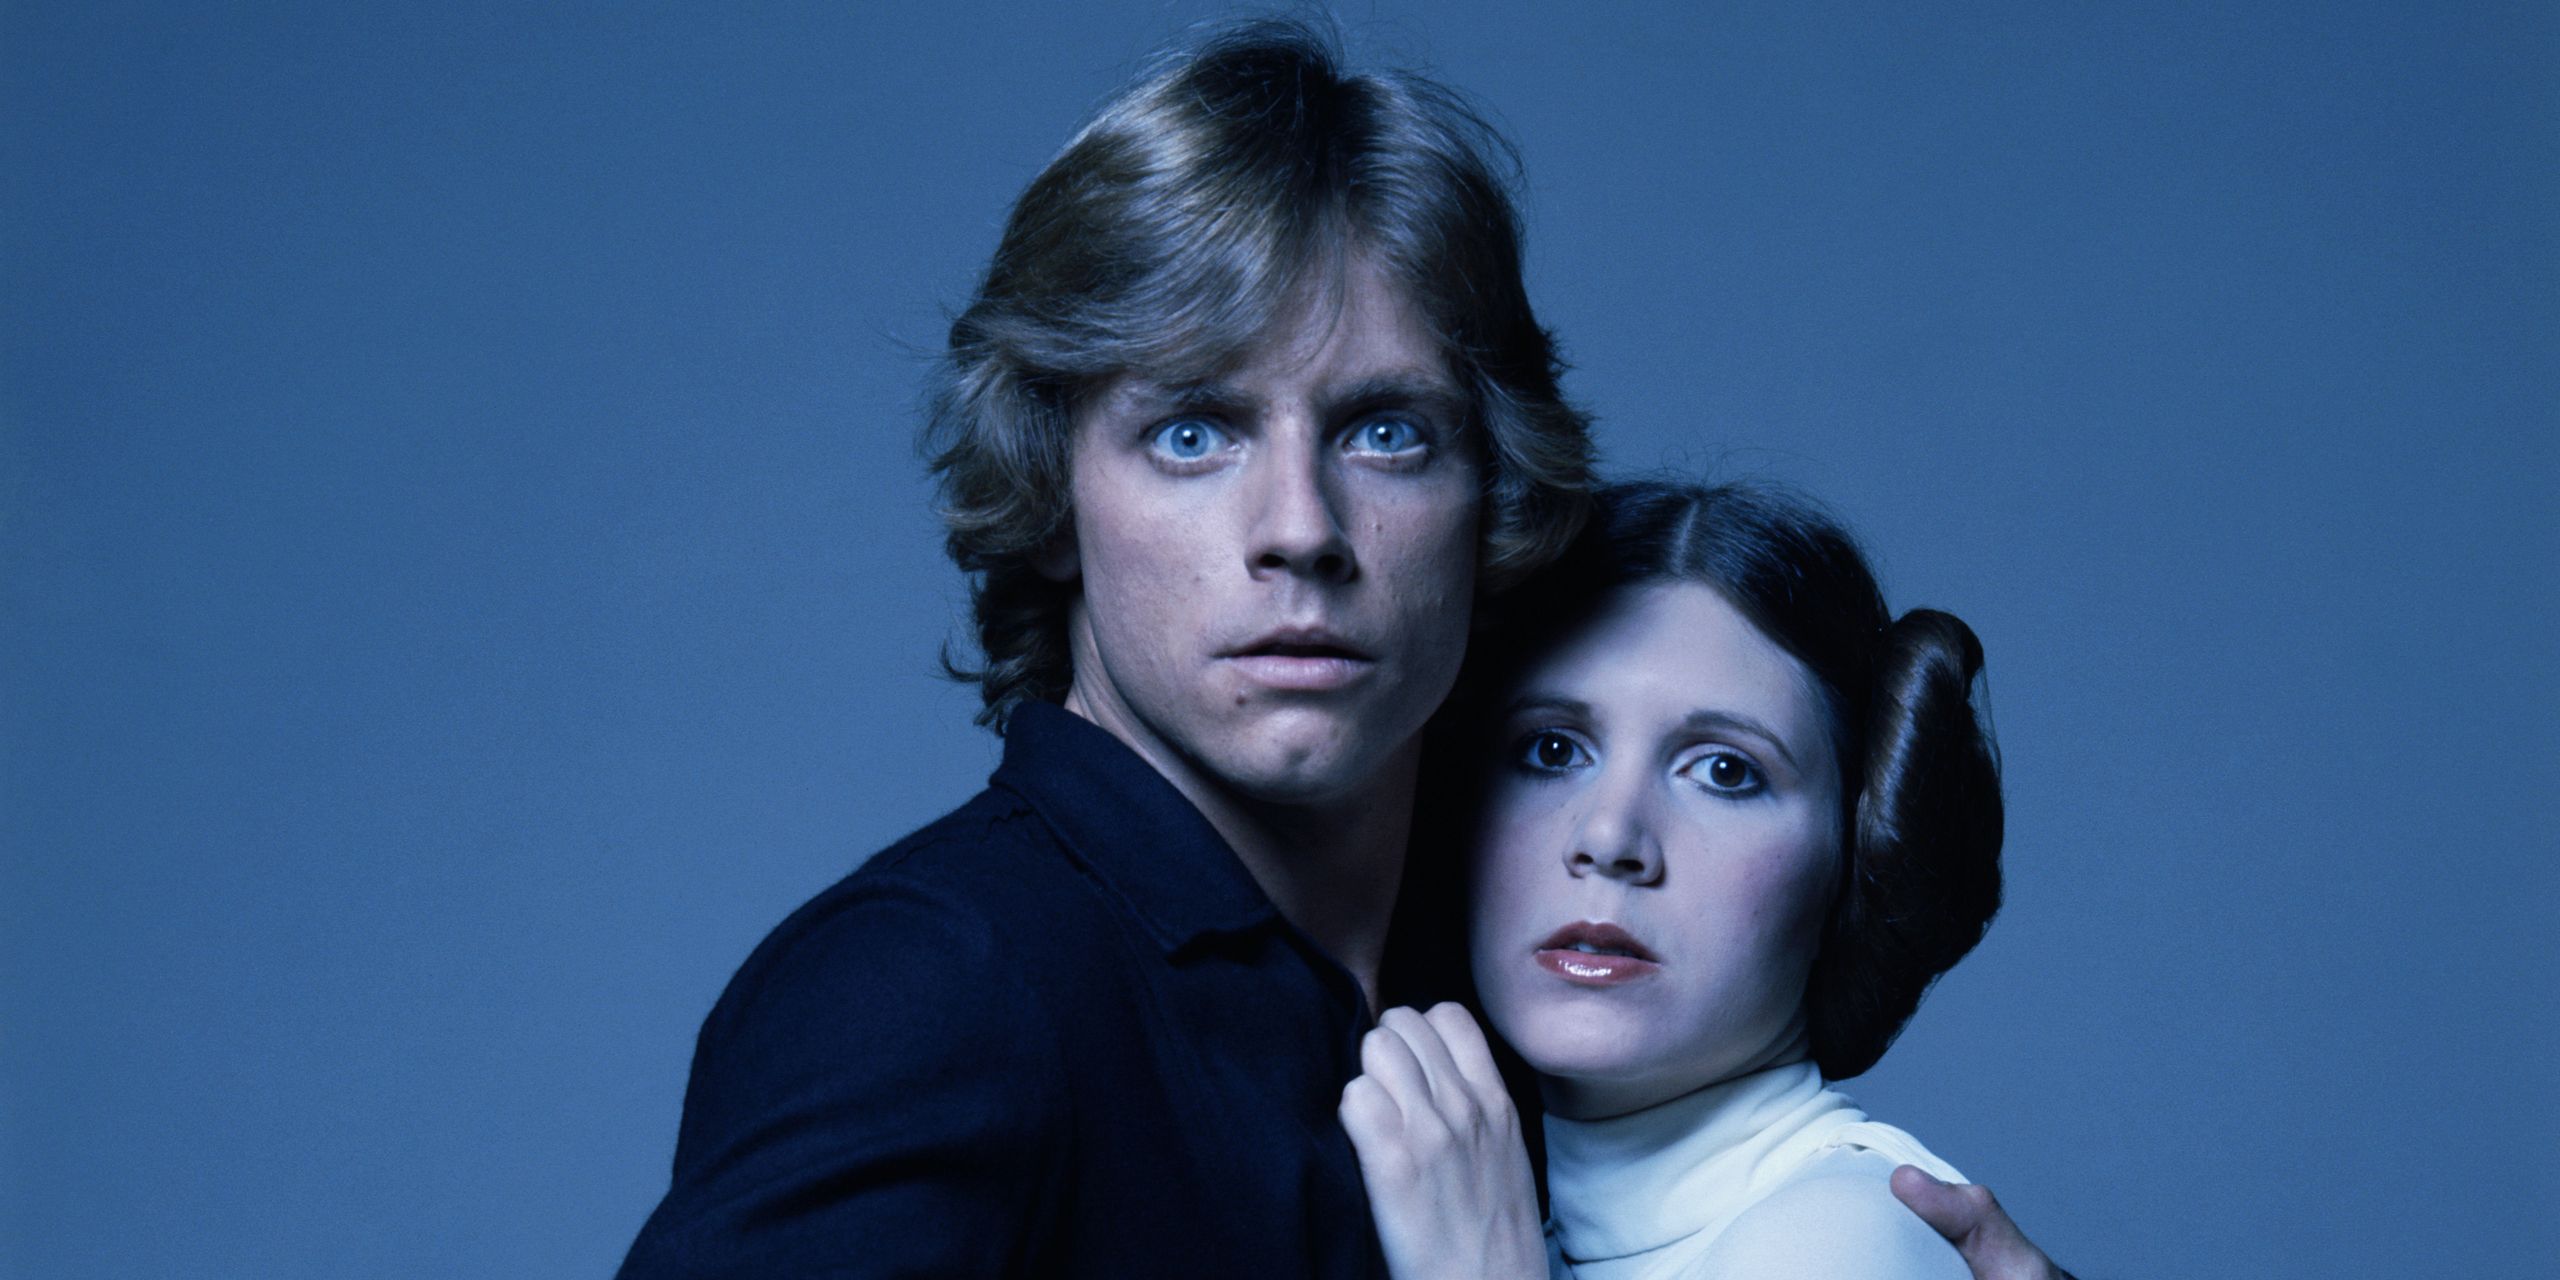 Luke and Leia holding each other in the Star Wars franchise